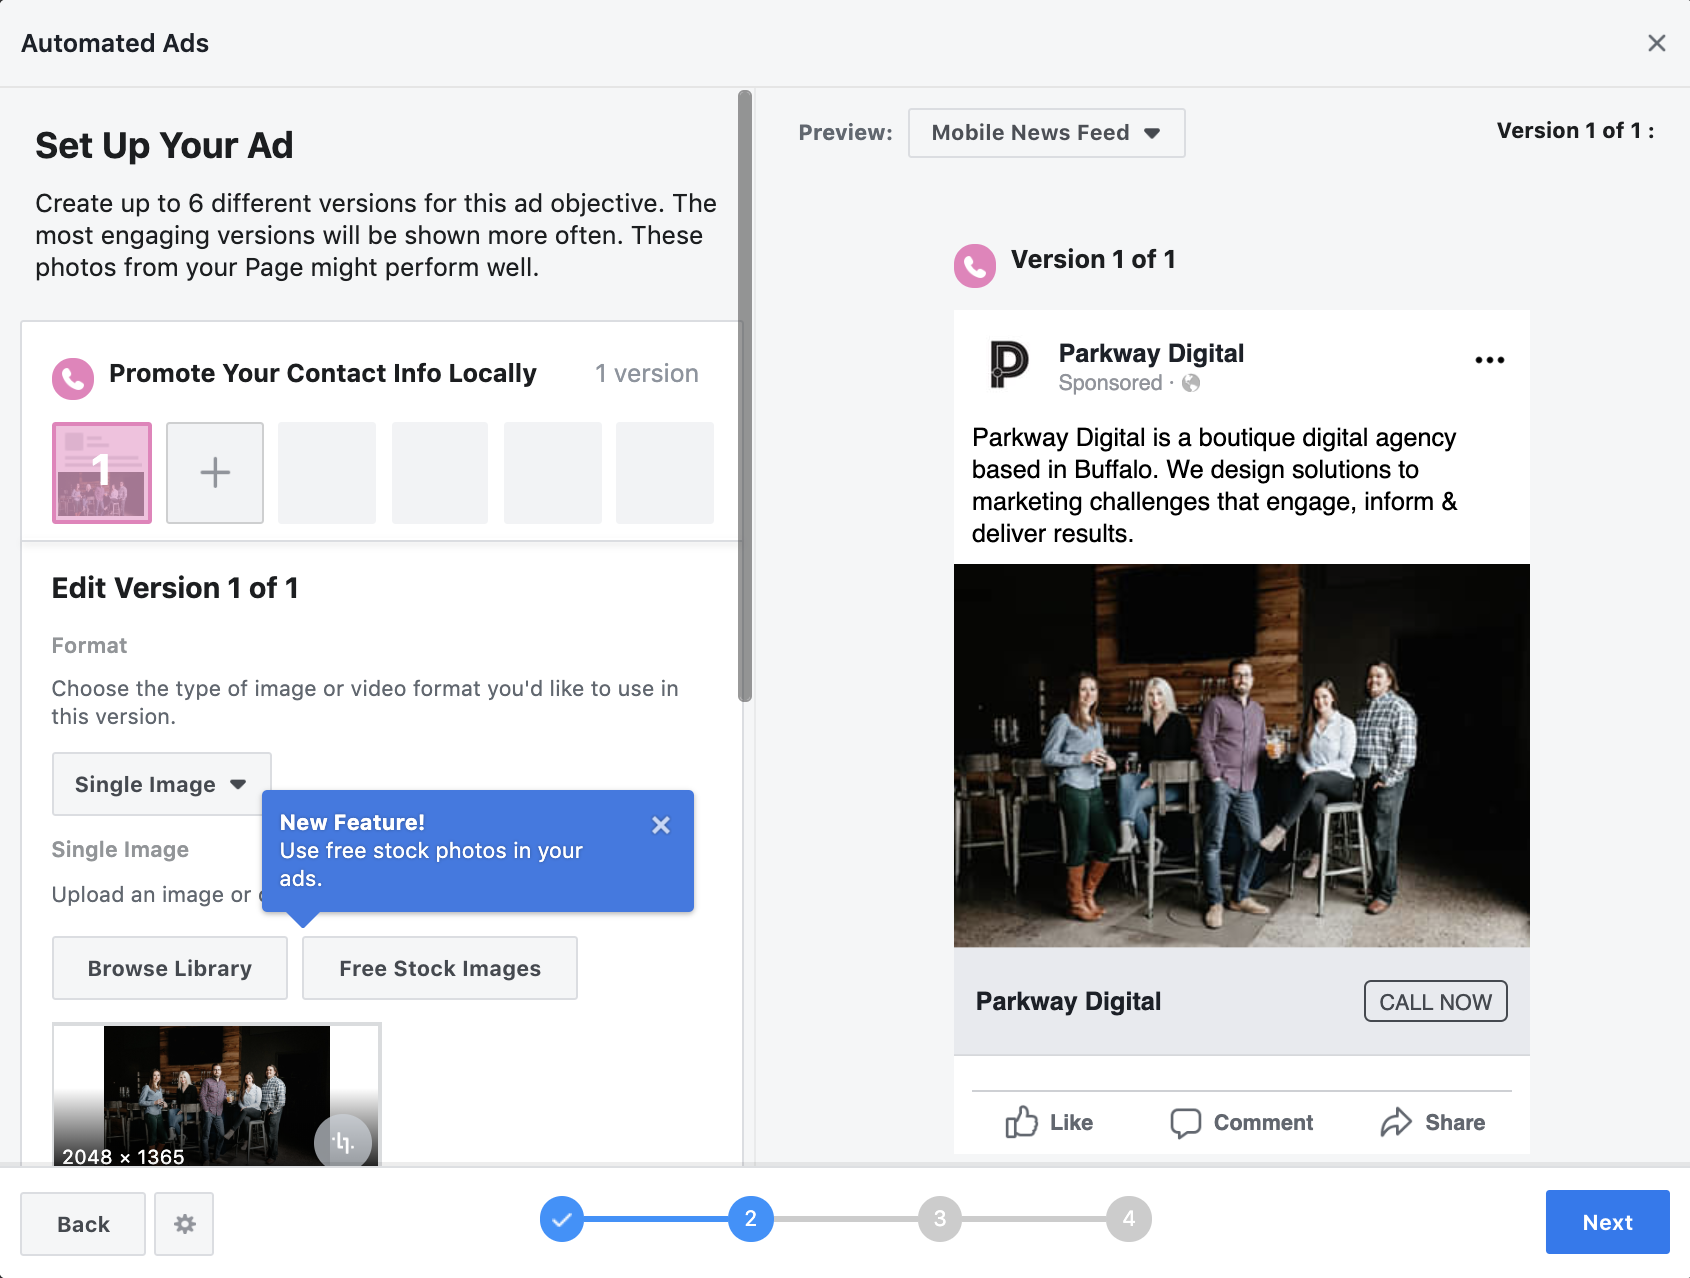 Screenshot of Automated Ad in Facebook Ads Manager